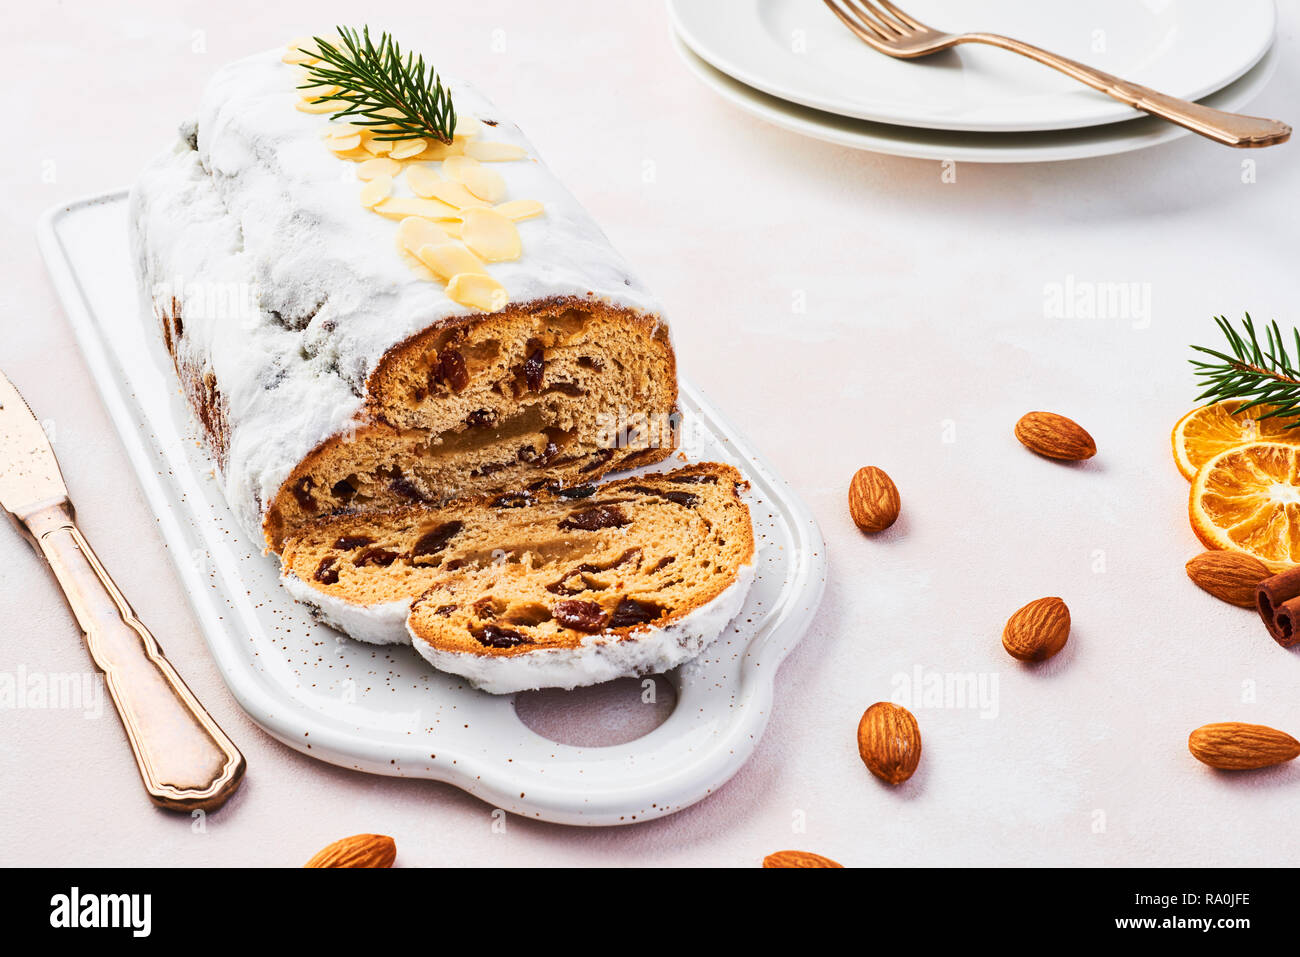 Christmas Stollen cake with icing sugar, marzipan, almonds and raisins on white serving plate. Traditional Dresdner christ pastry. Stock Photo